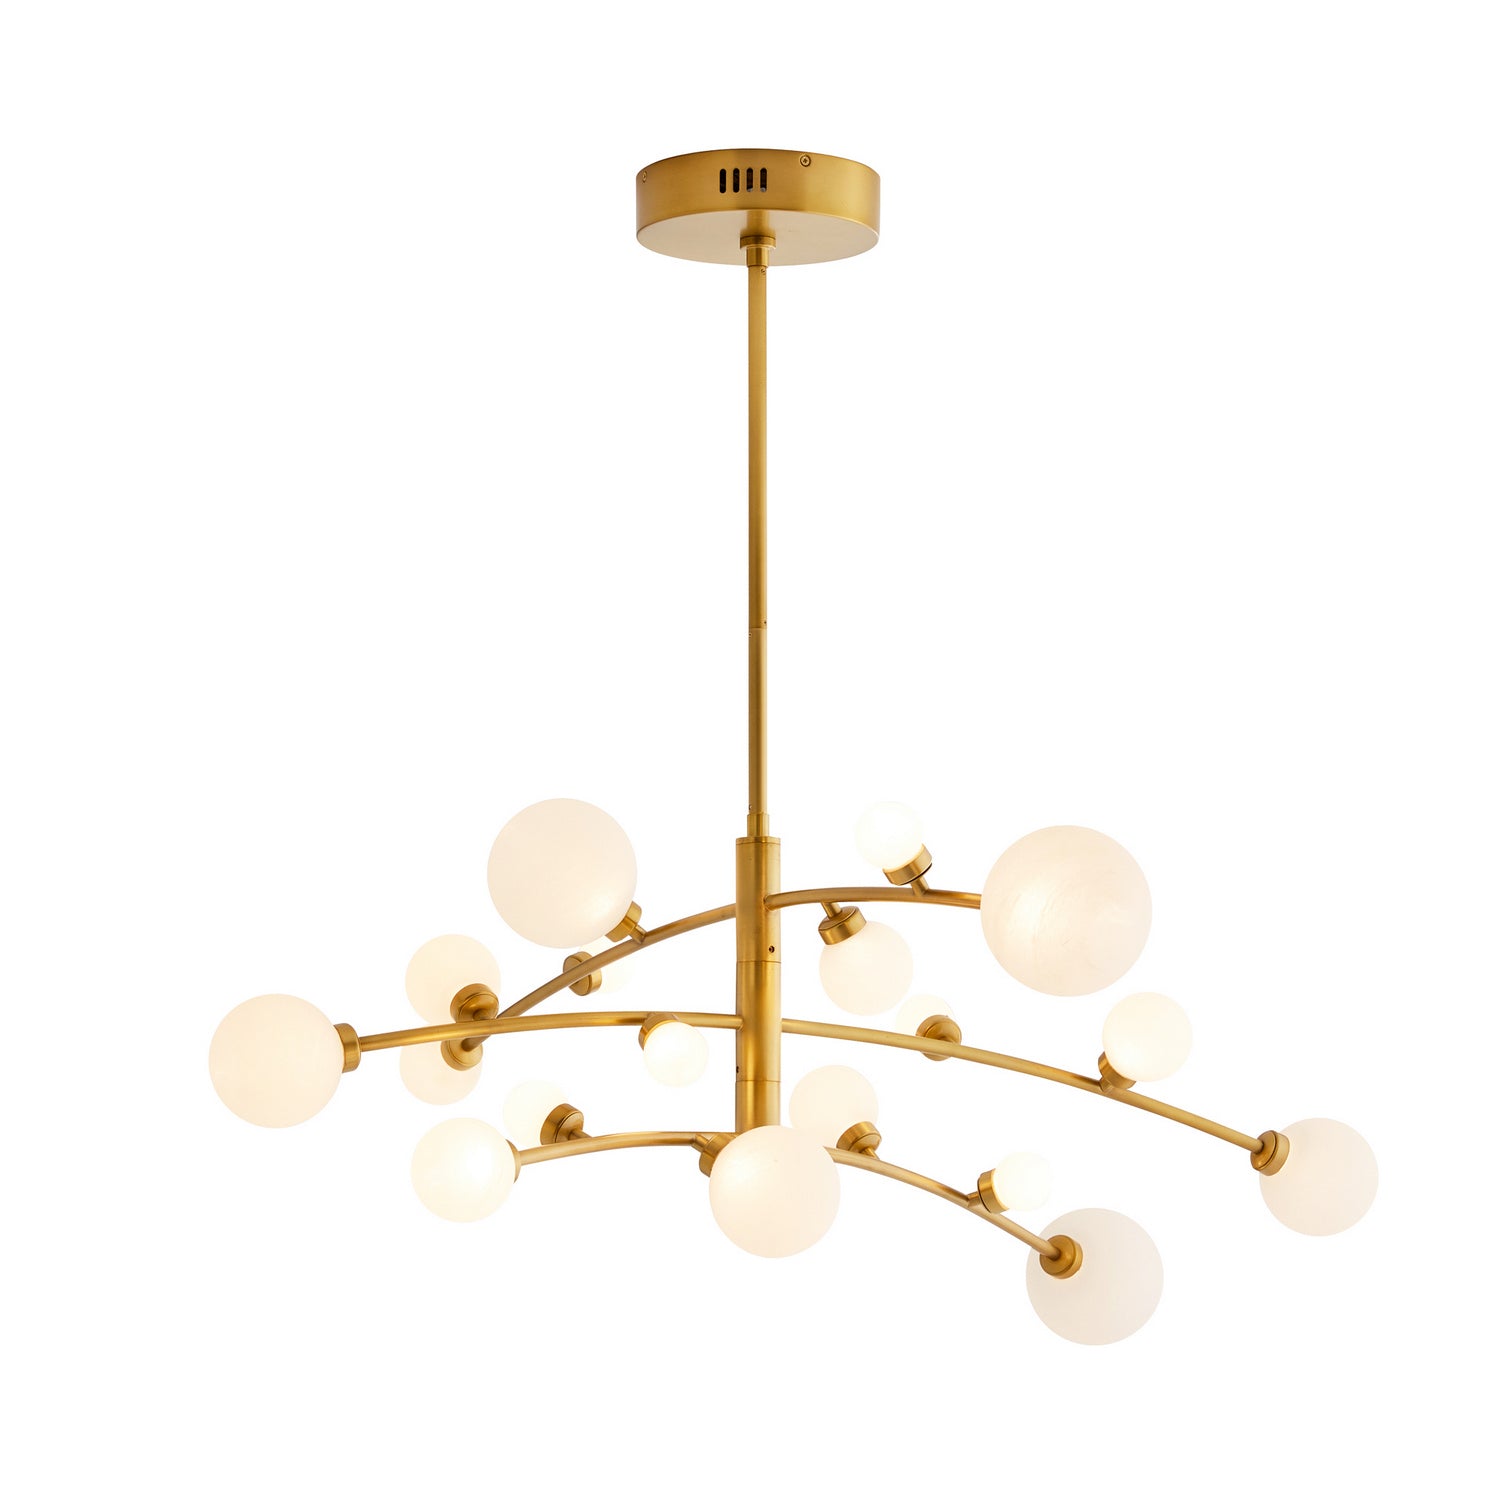 LED Chandelier from the Maser collection in Antique Brass finish